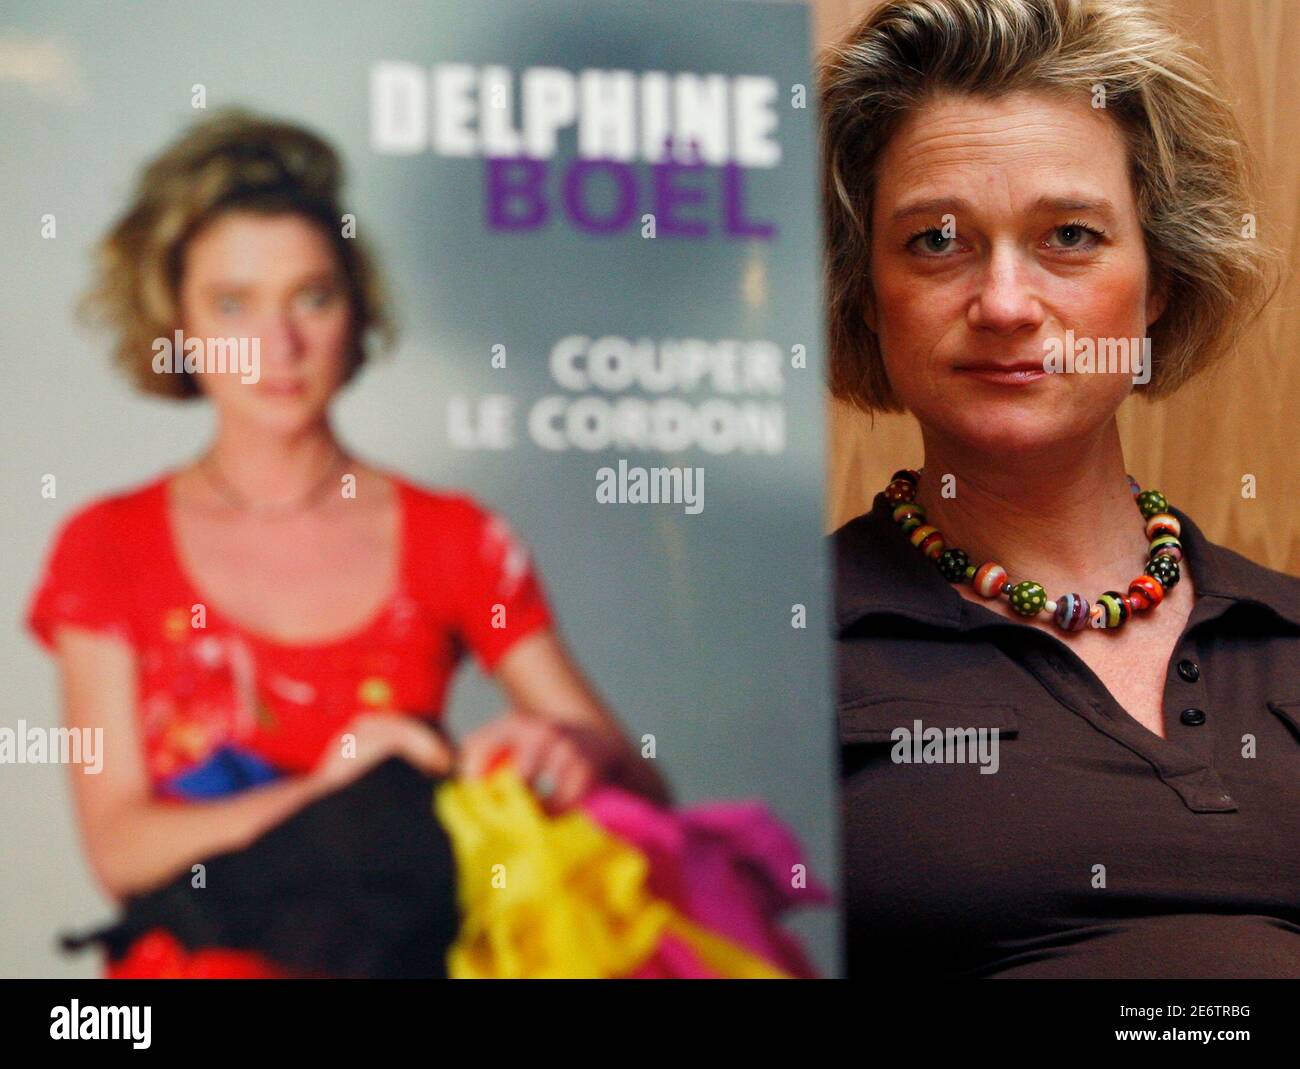 Belgian artist Delphine Boel, who says she is the illegitimate daughter of Belgian King Albert II, presents her book 'Cutting the Cord' in Brussels, in which she recounts her life and show examples of her art, April 9, 2008. The Royal Palace has never commented on whether the king is Boel's father.    REUTERS/Francois Lenoir       (BELGIUM) Stock Photo